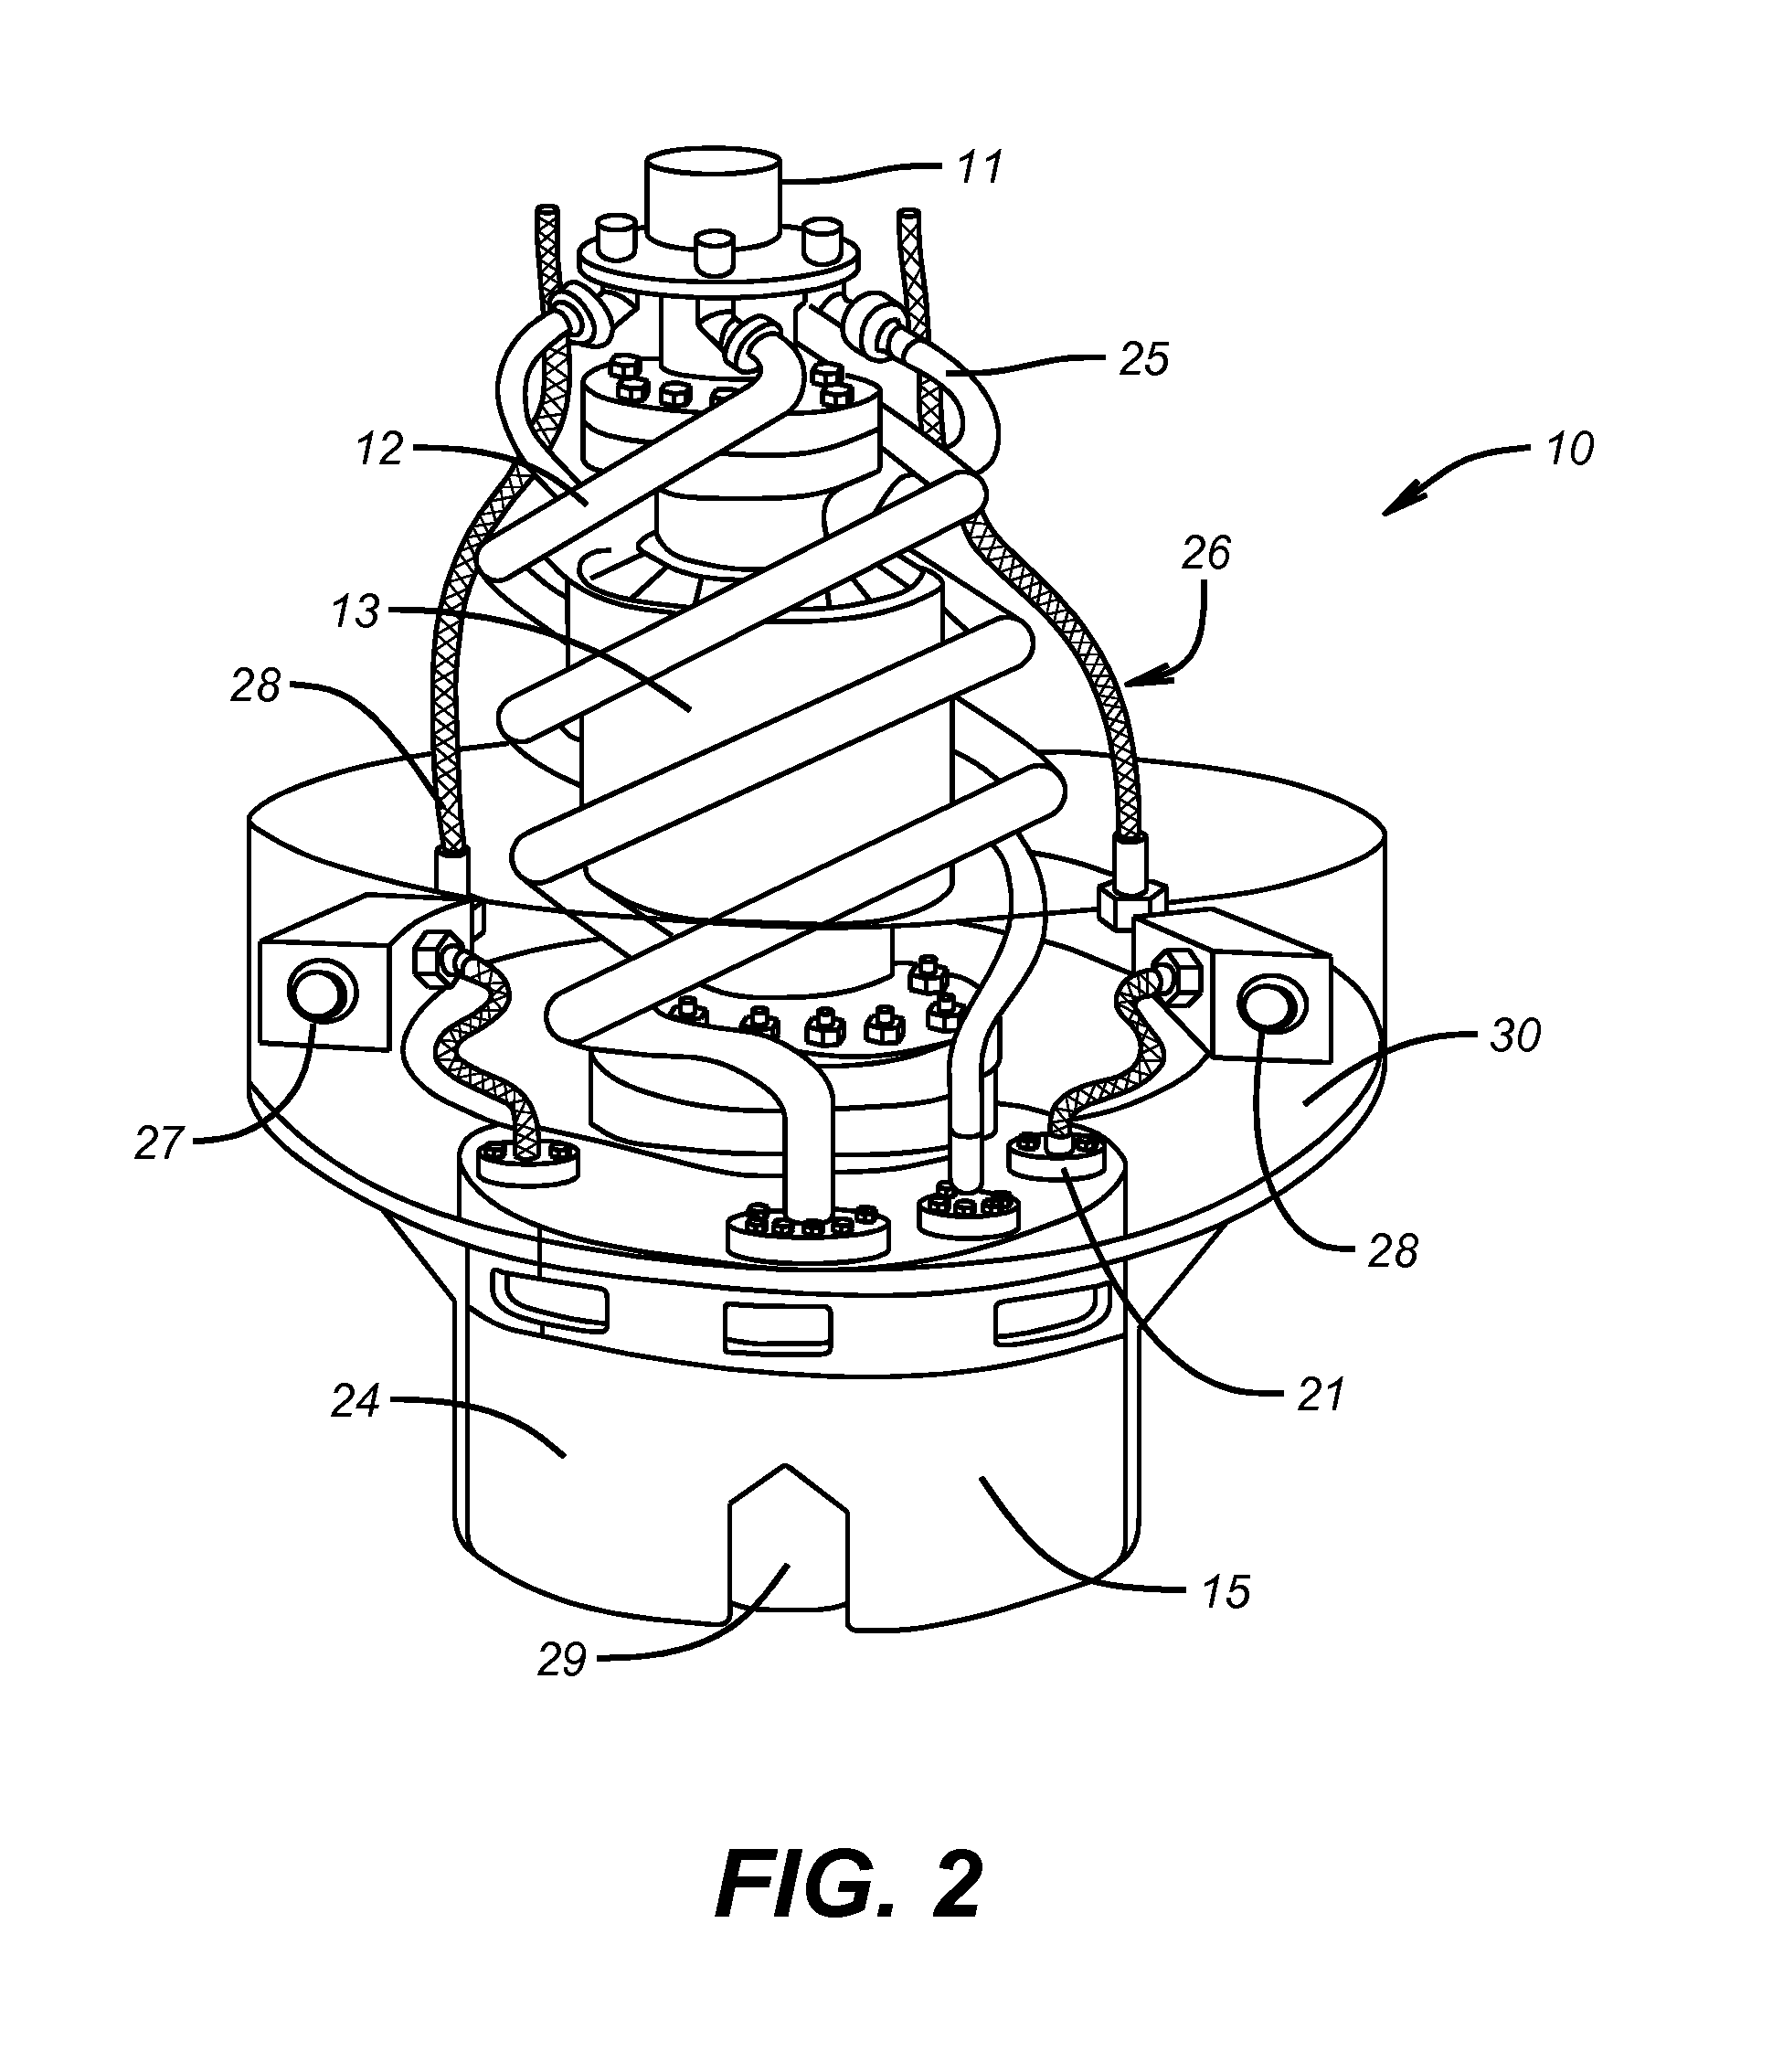 Modular, distributed, ROV retrievable subsea control system, associated deepwater subsea blowout preventer stack configuration, and methods of use